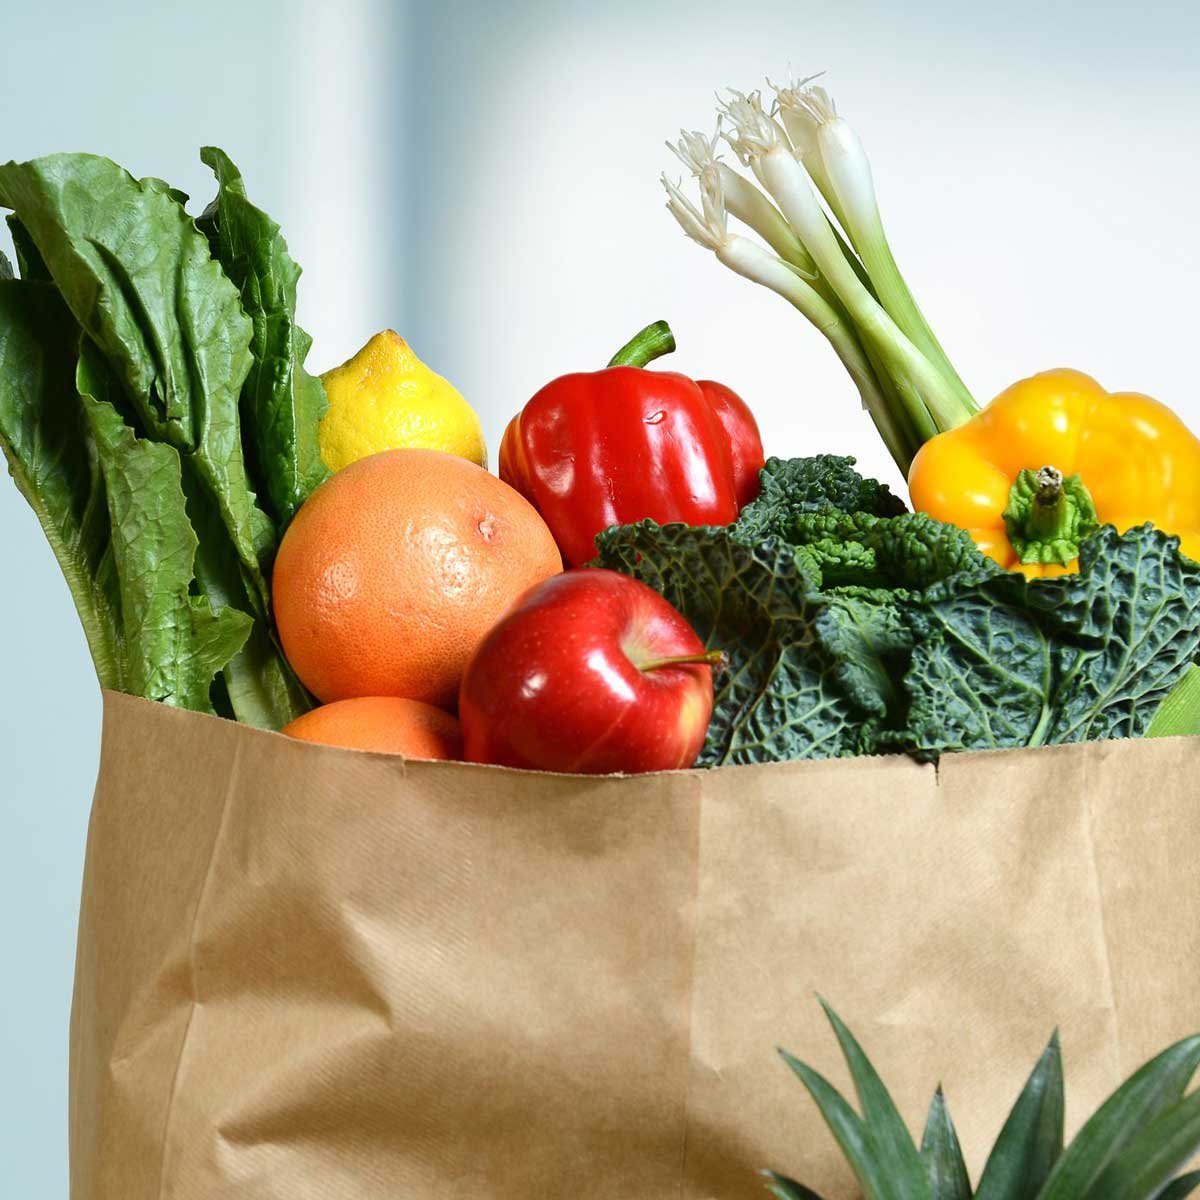 Why Should You be Buying Groceries and Fresh Produce Online